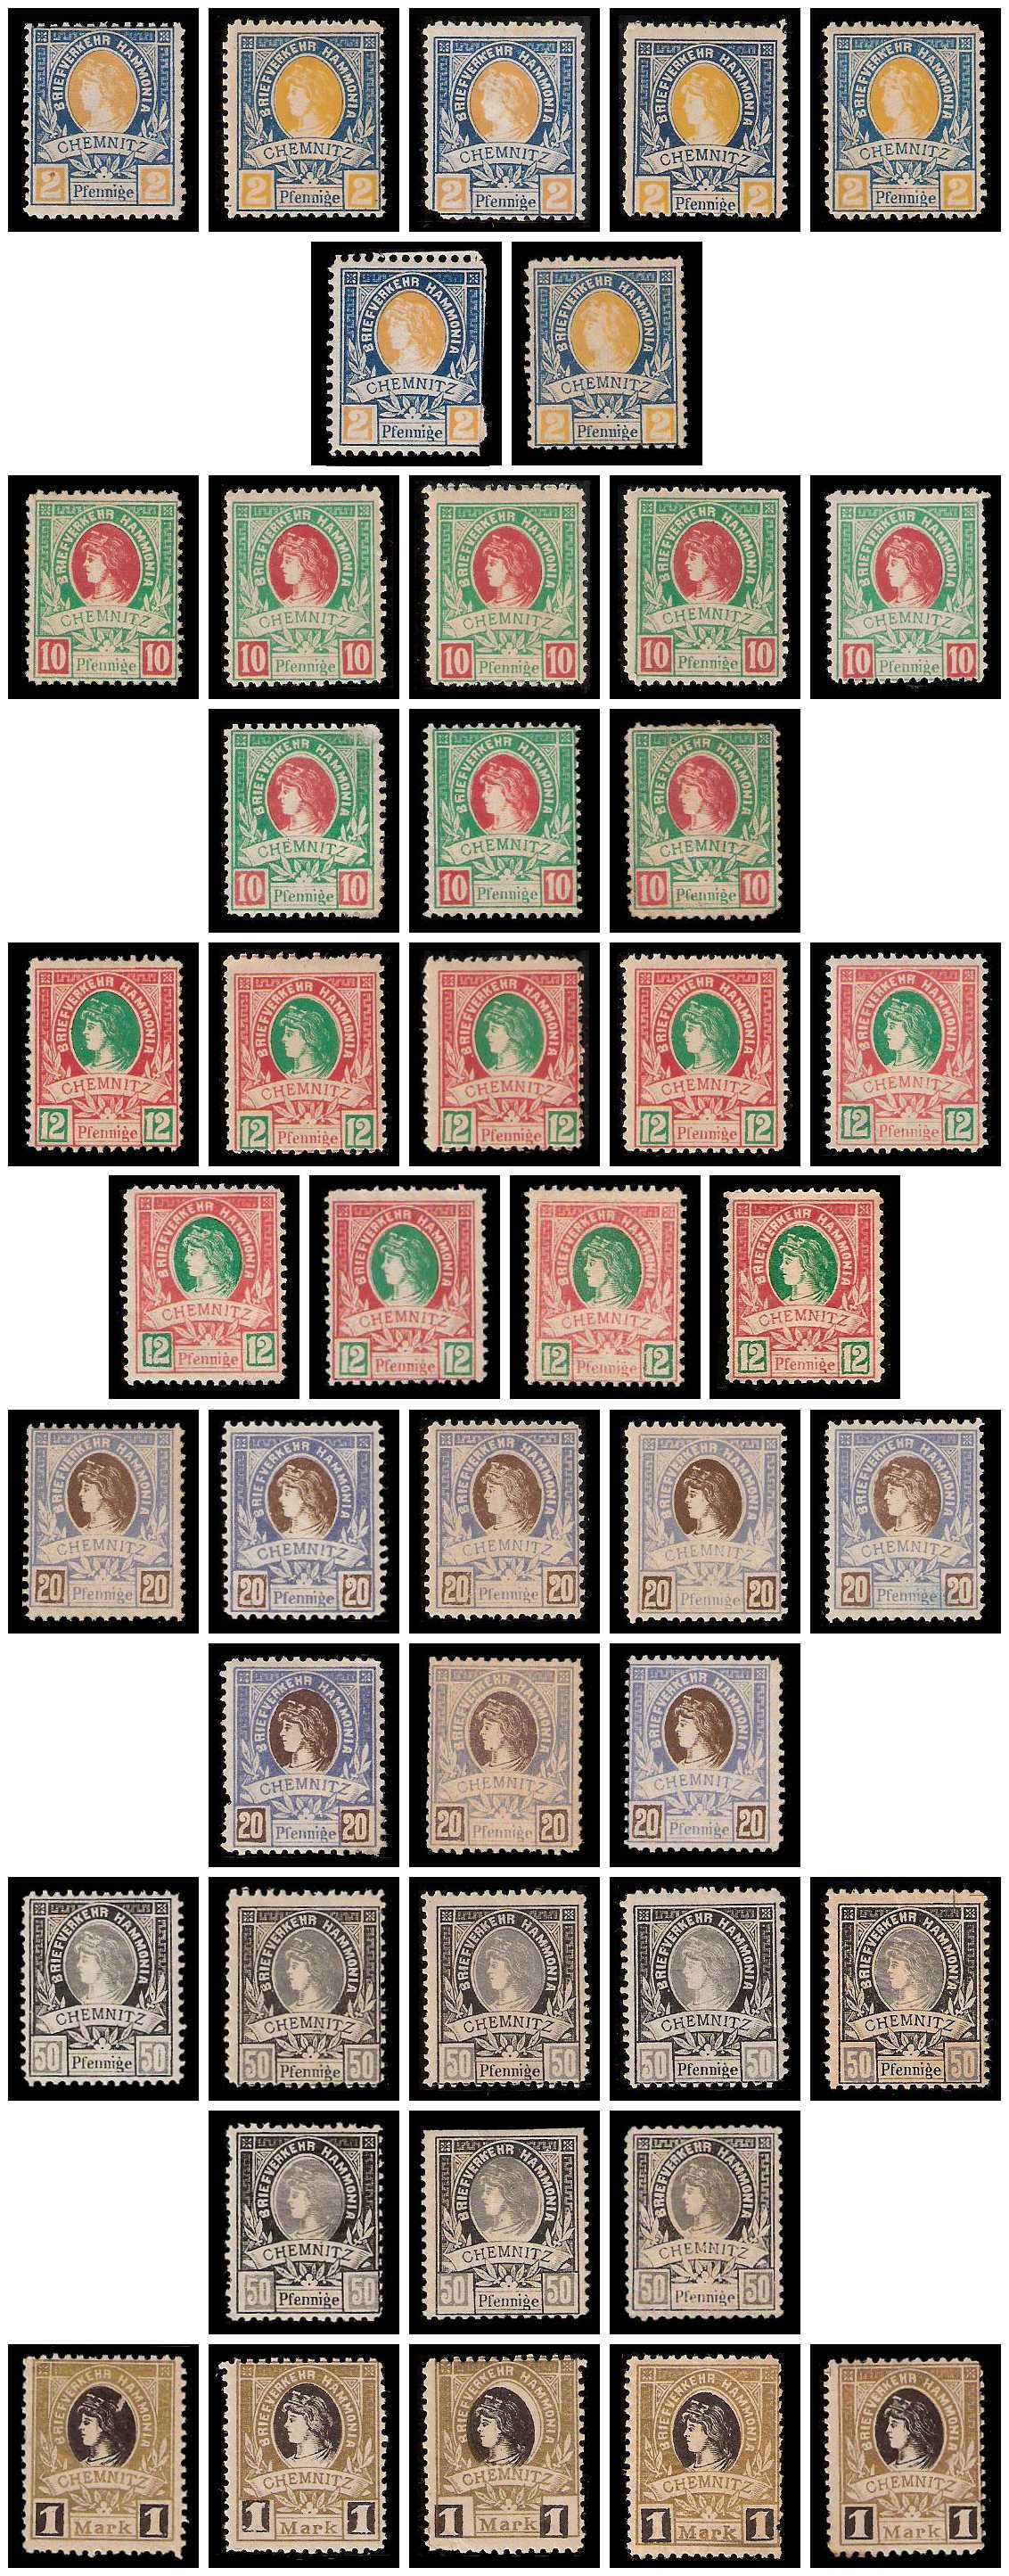 5.1887 Germany Private Mail Chemnitz Mi A 22/27 collection 01